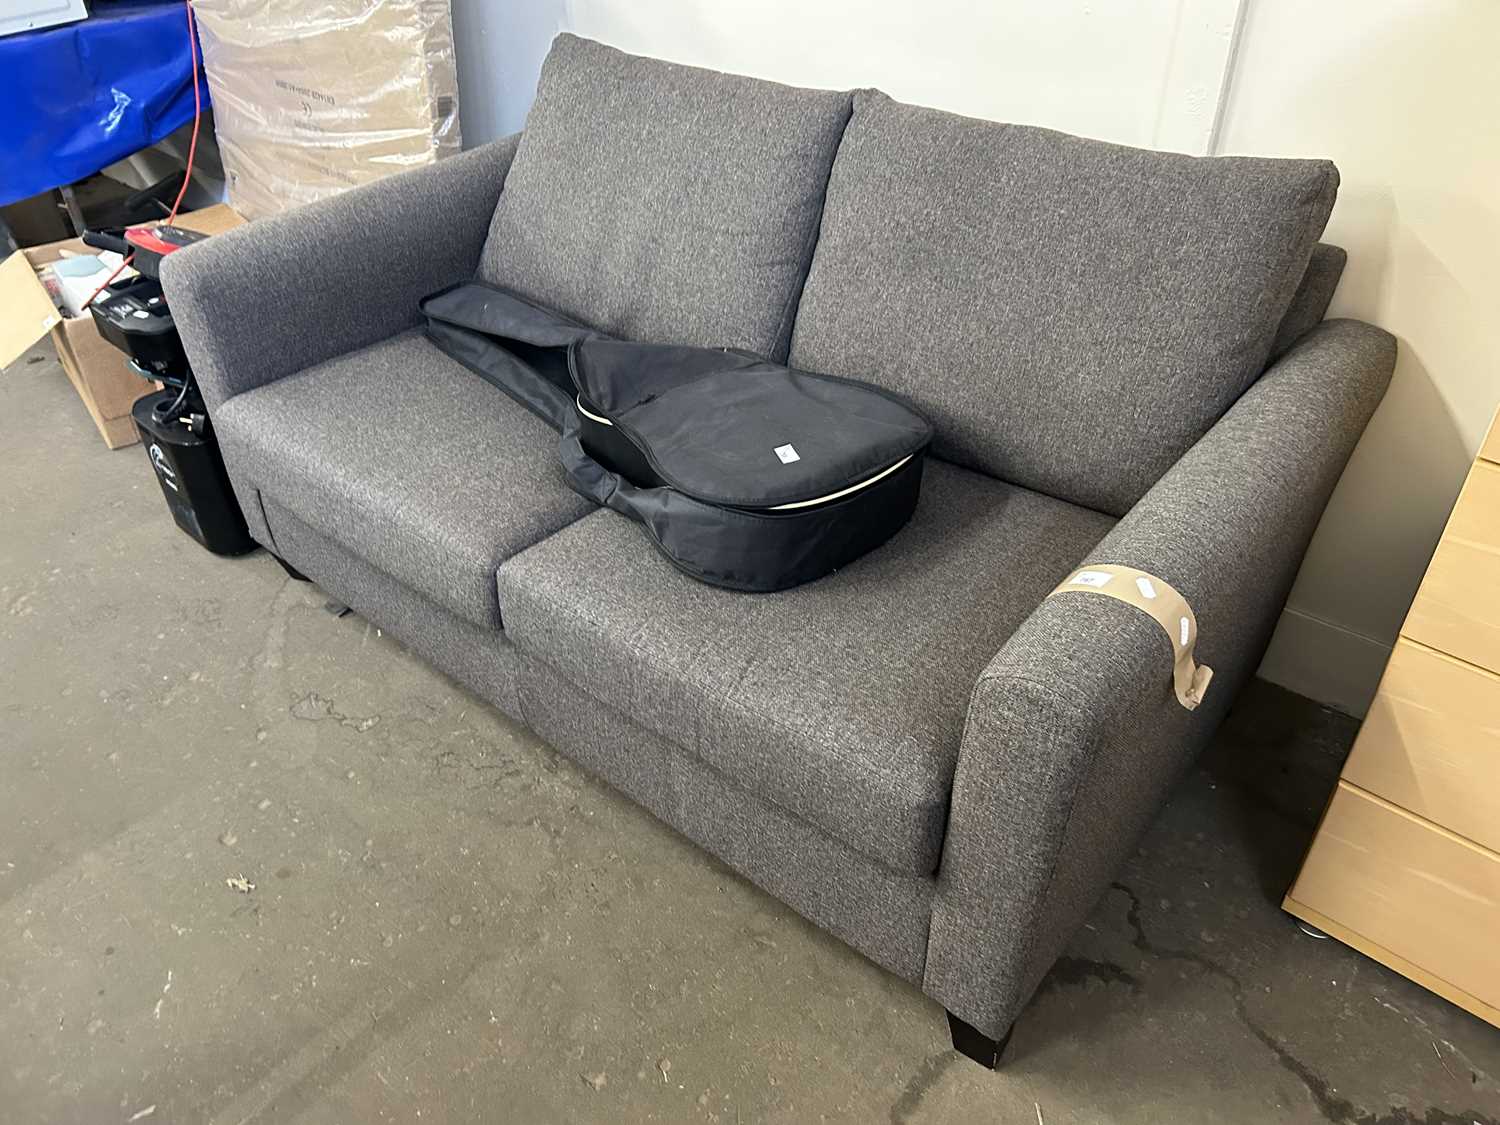 A grey upholstered two seater sofa, approx 160cm wide